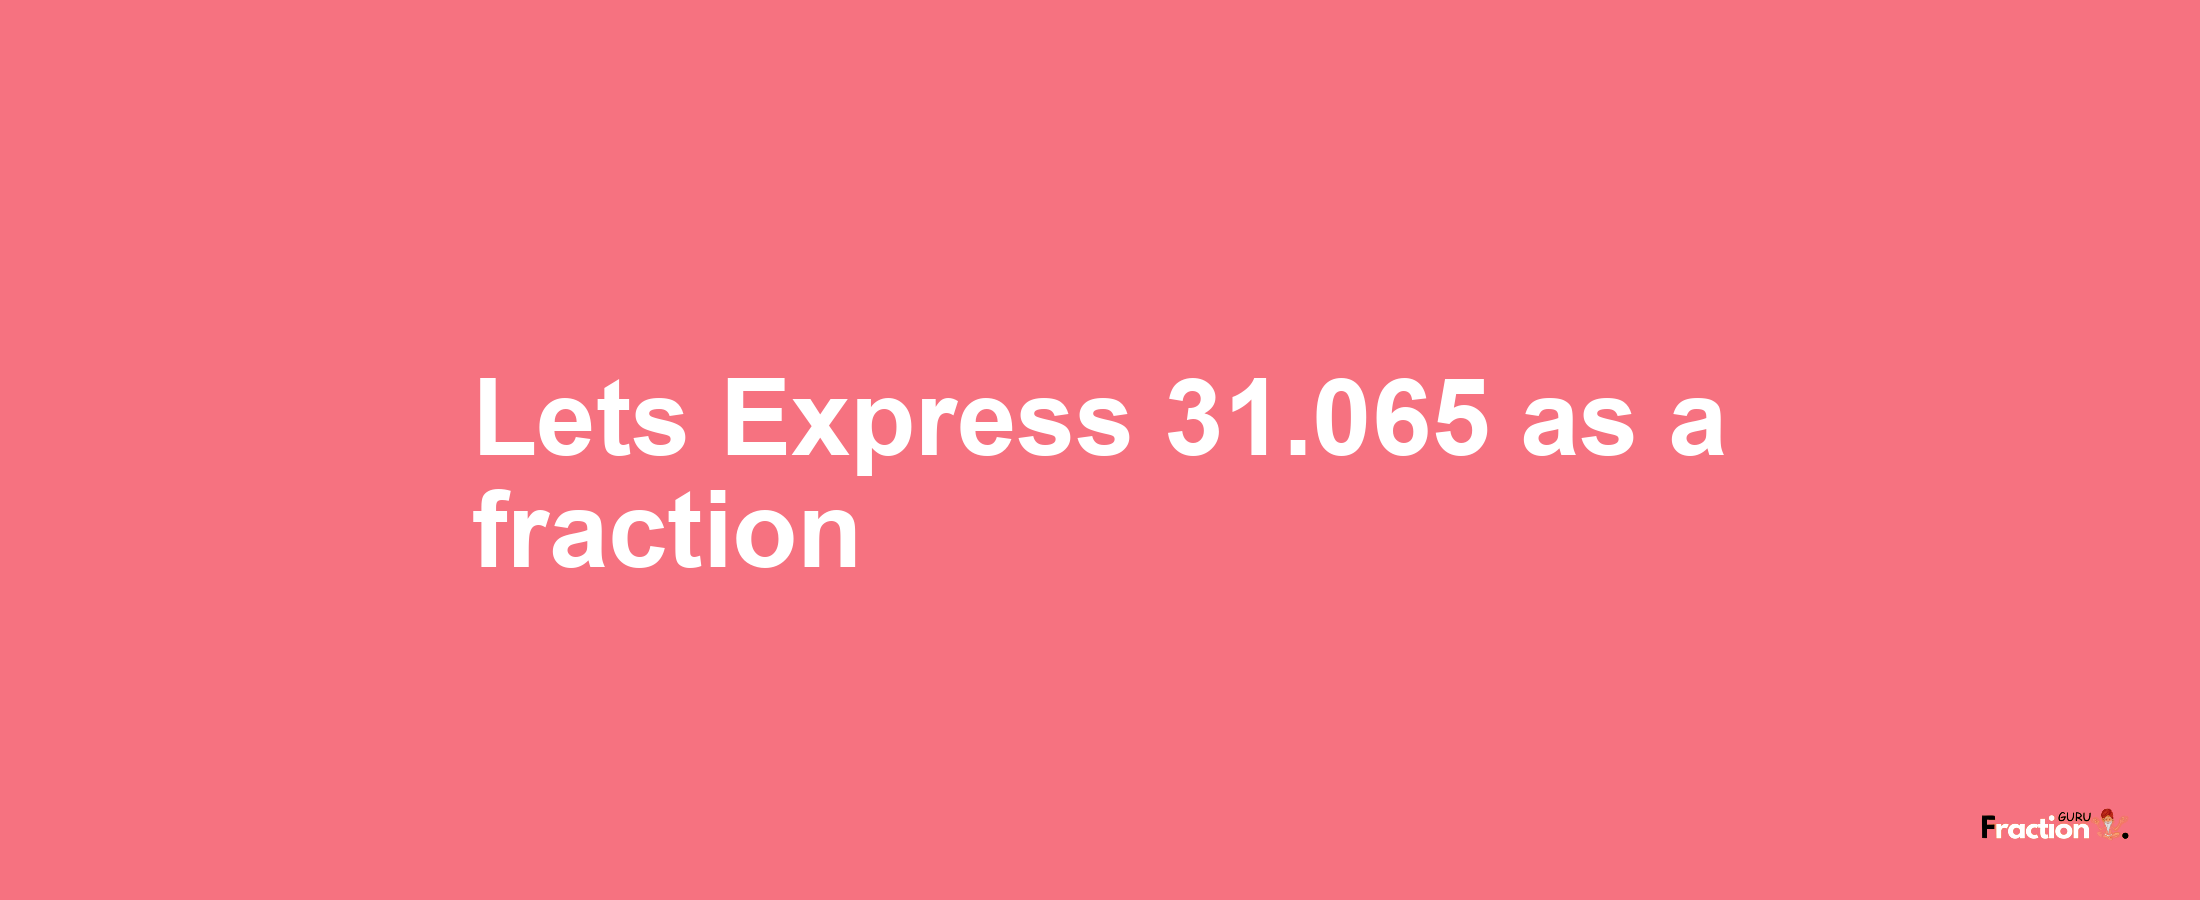 Lets Express 31.065 as afraction